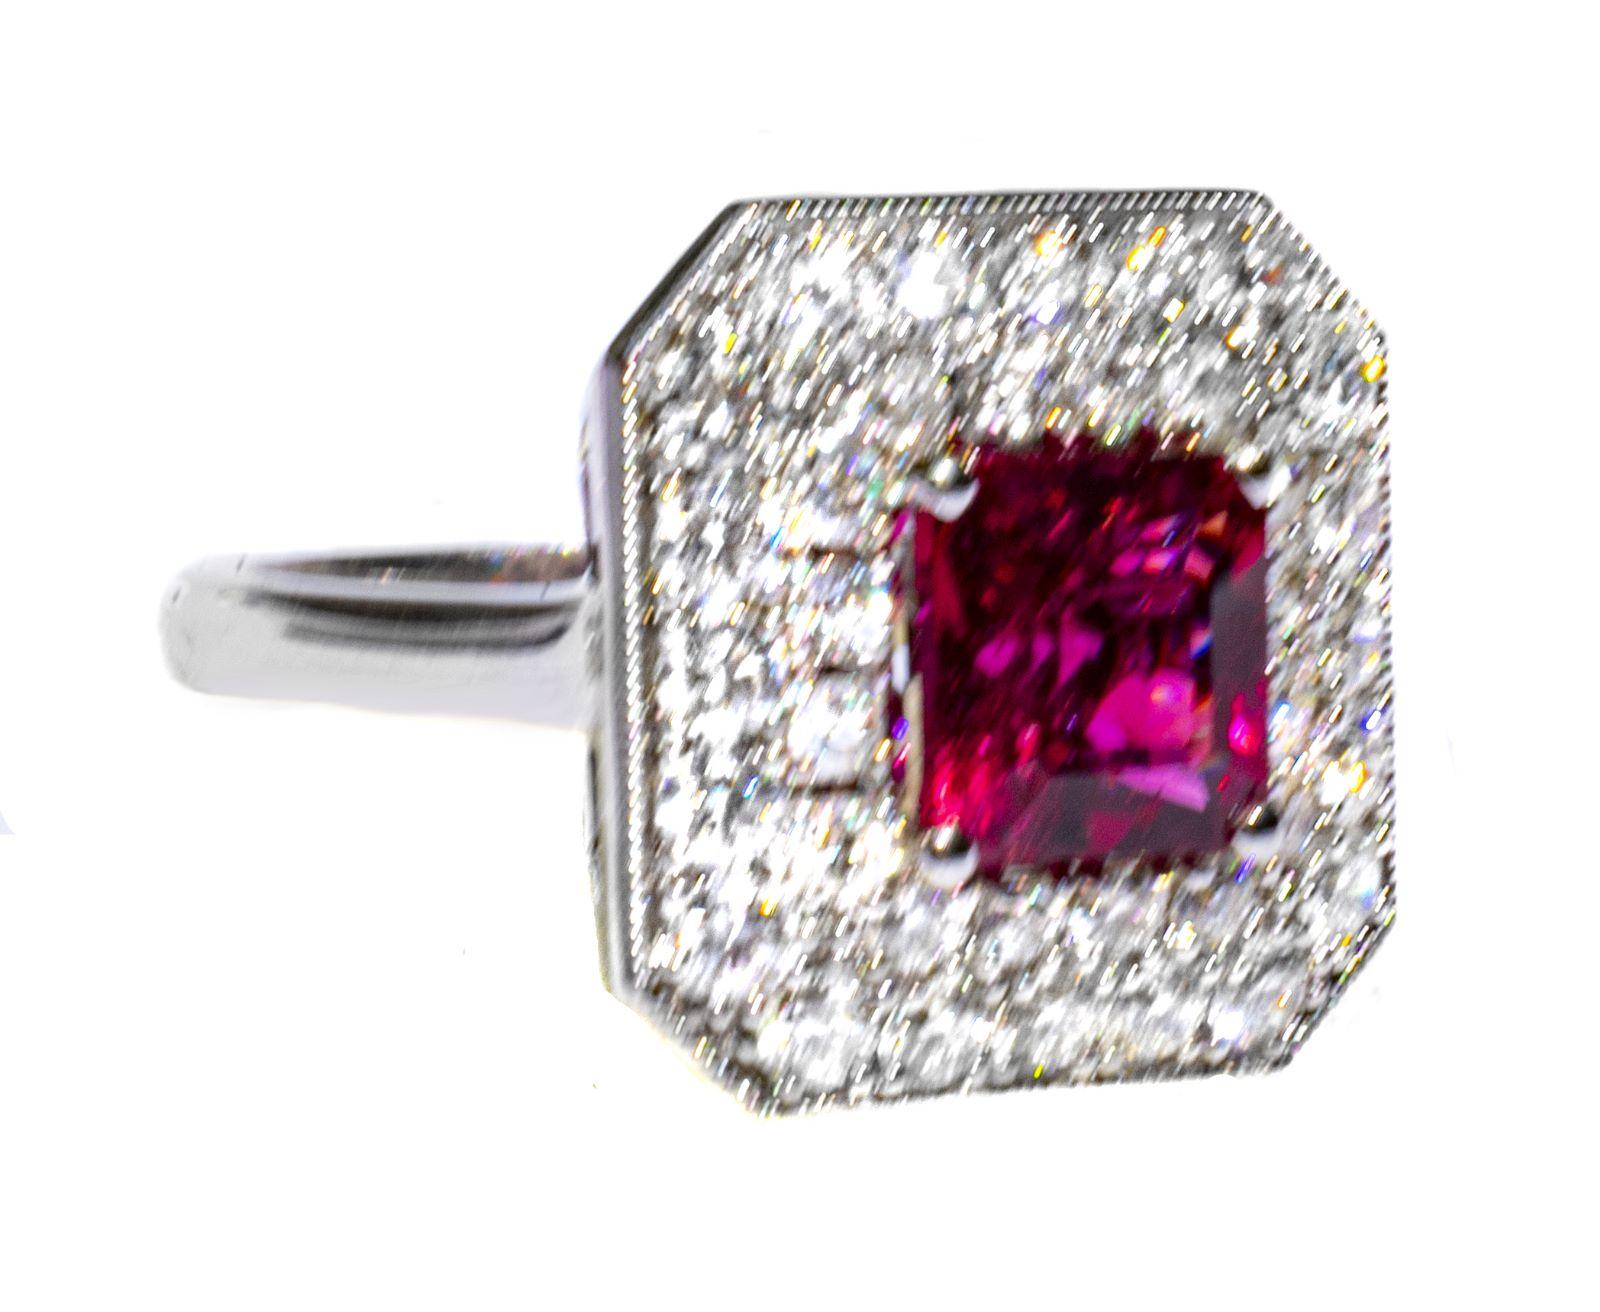 Most jewelry stores don't even sell tourmaline, but If you know (and love!) colored gemstones, you know tourmalines!


This tourmaline looks exactly like a AAA ruby. It has that perfect 'ruby red' color with gorgeous red sparkle. Mined in